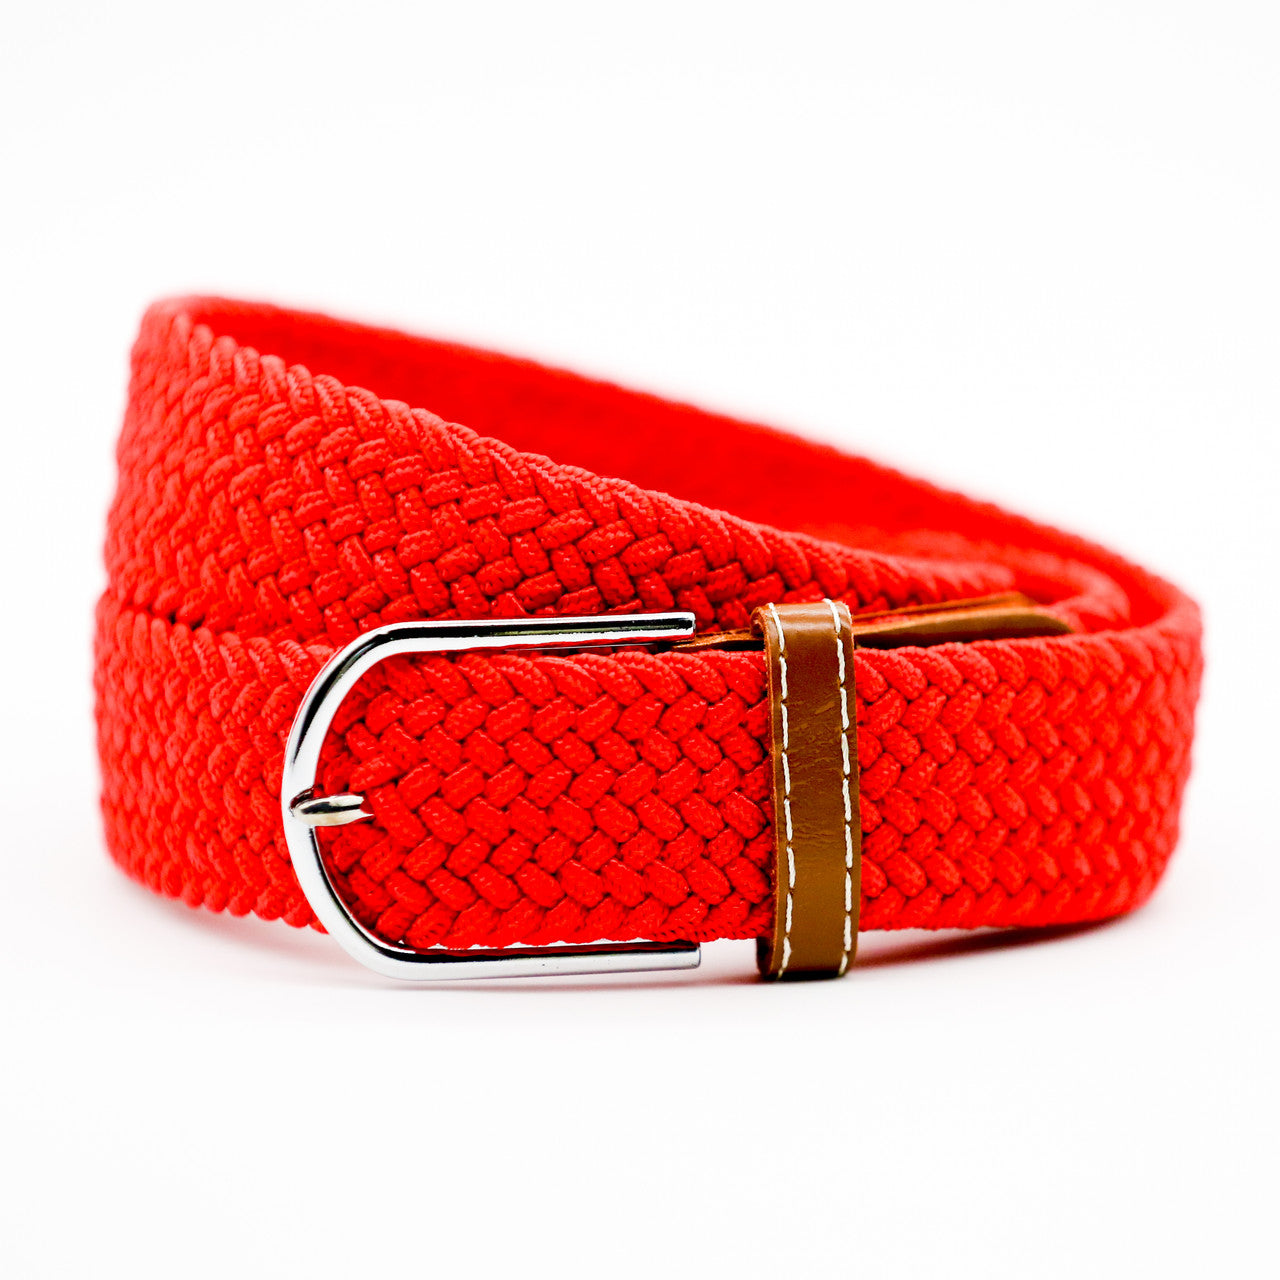 Thick Red Belt with Tan Ends